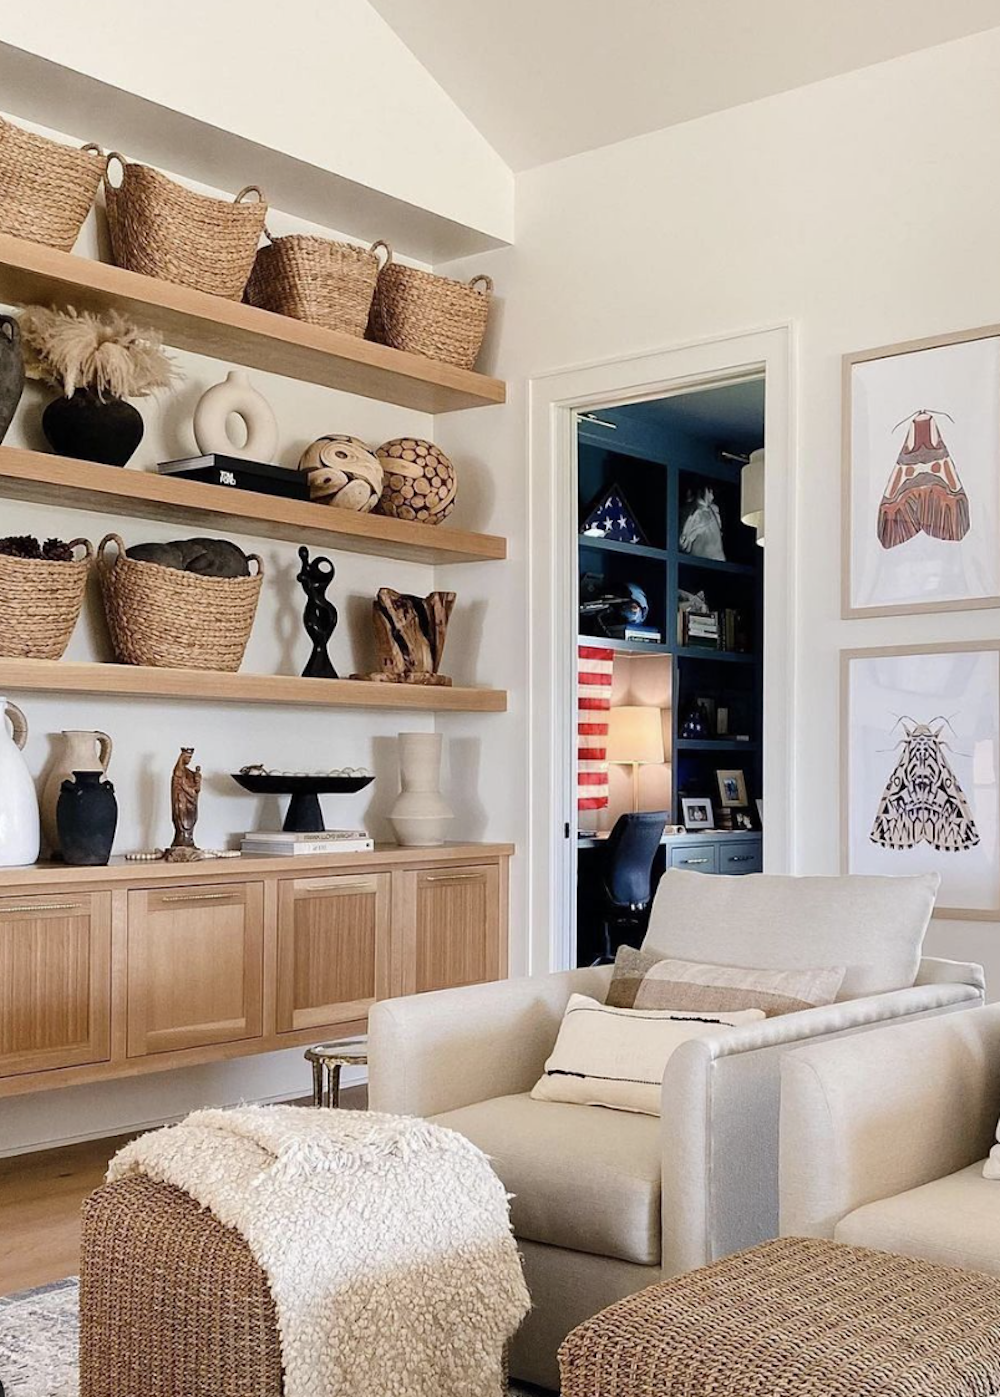 image of a shelf system in a light and airy living room styles with basket decor